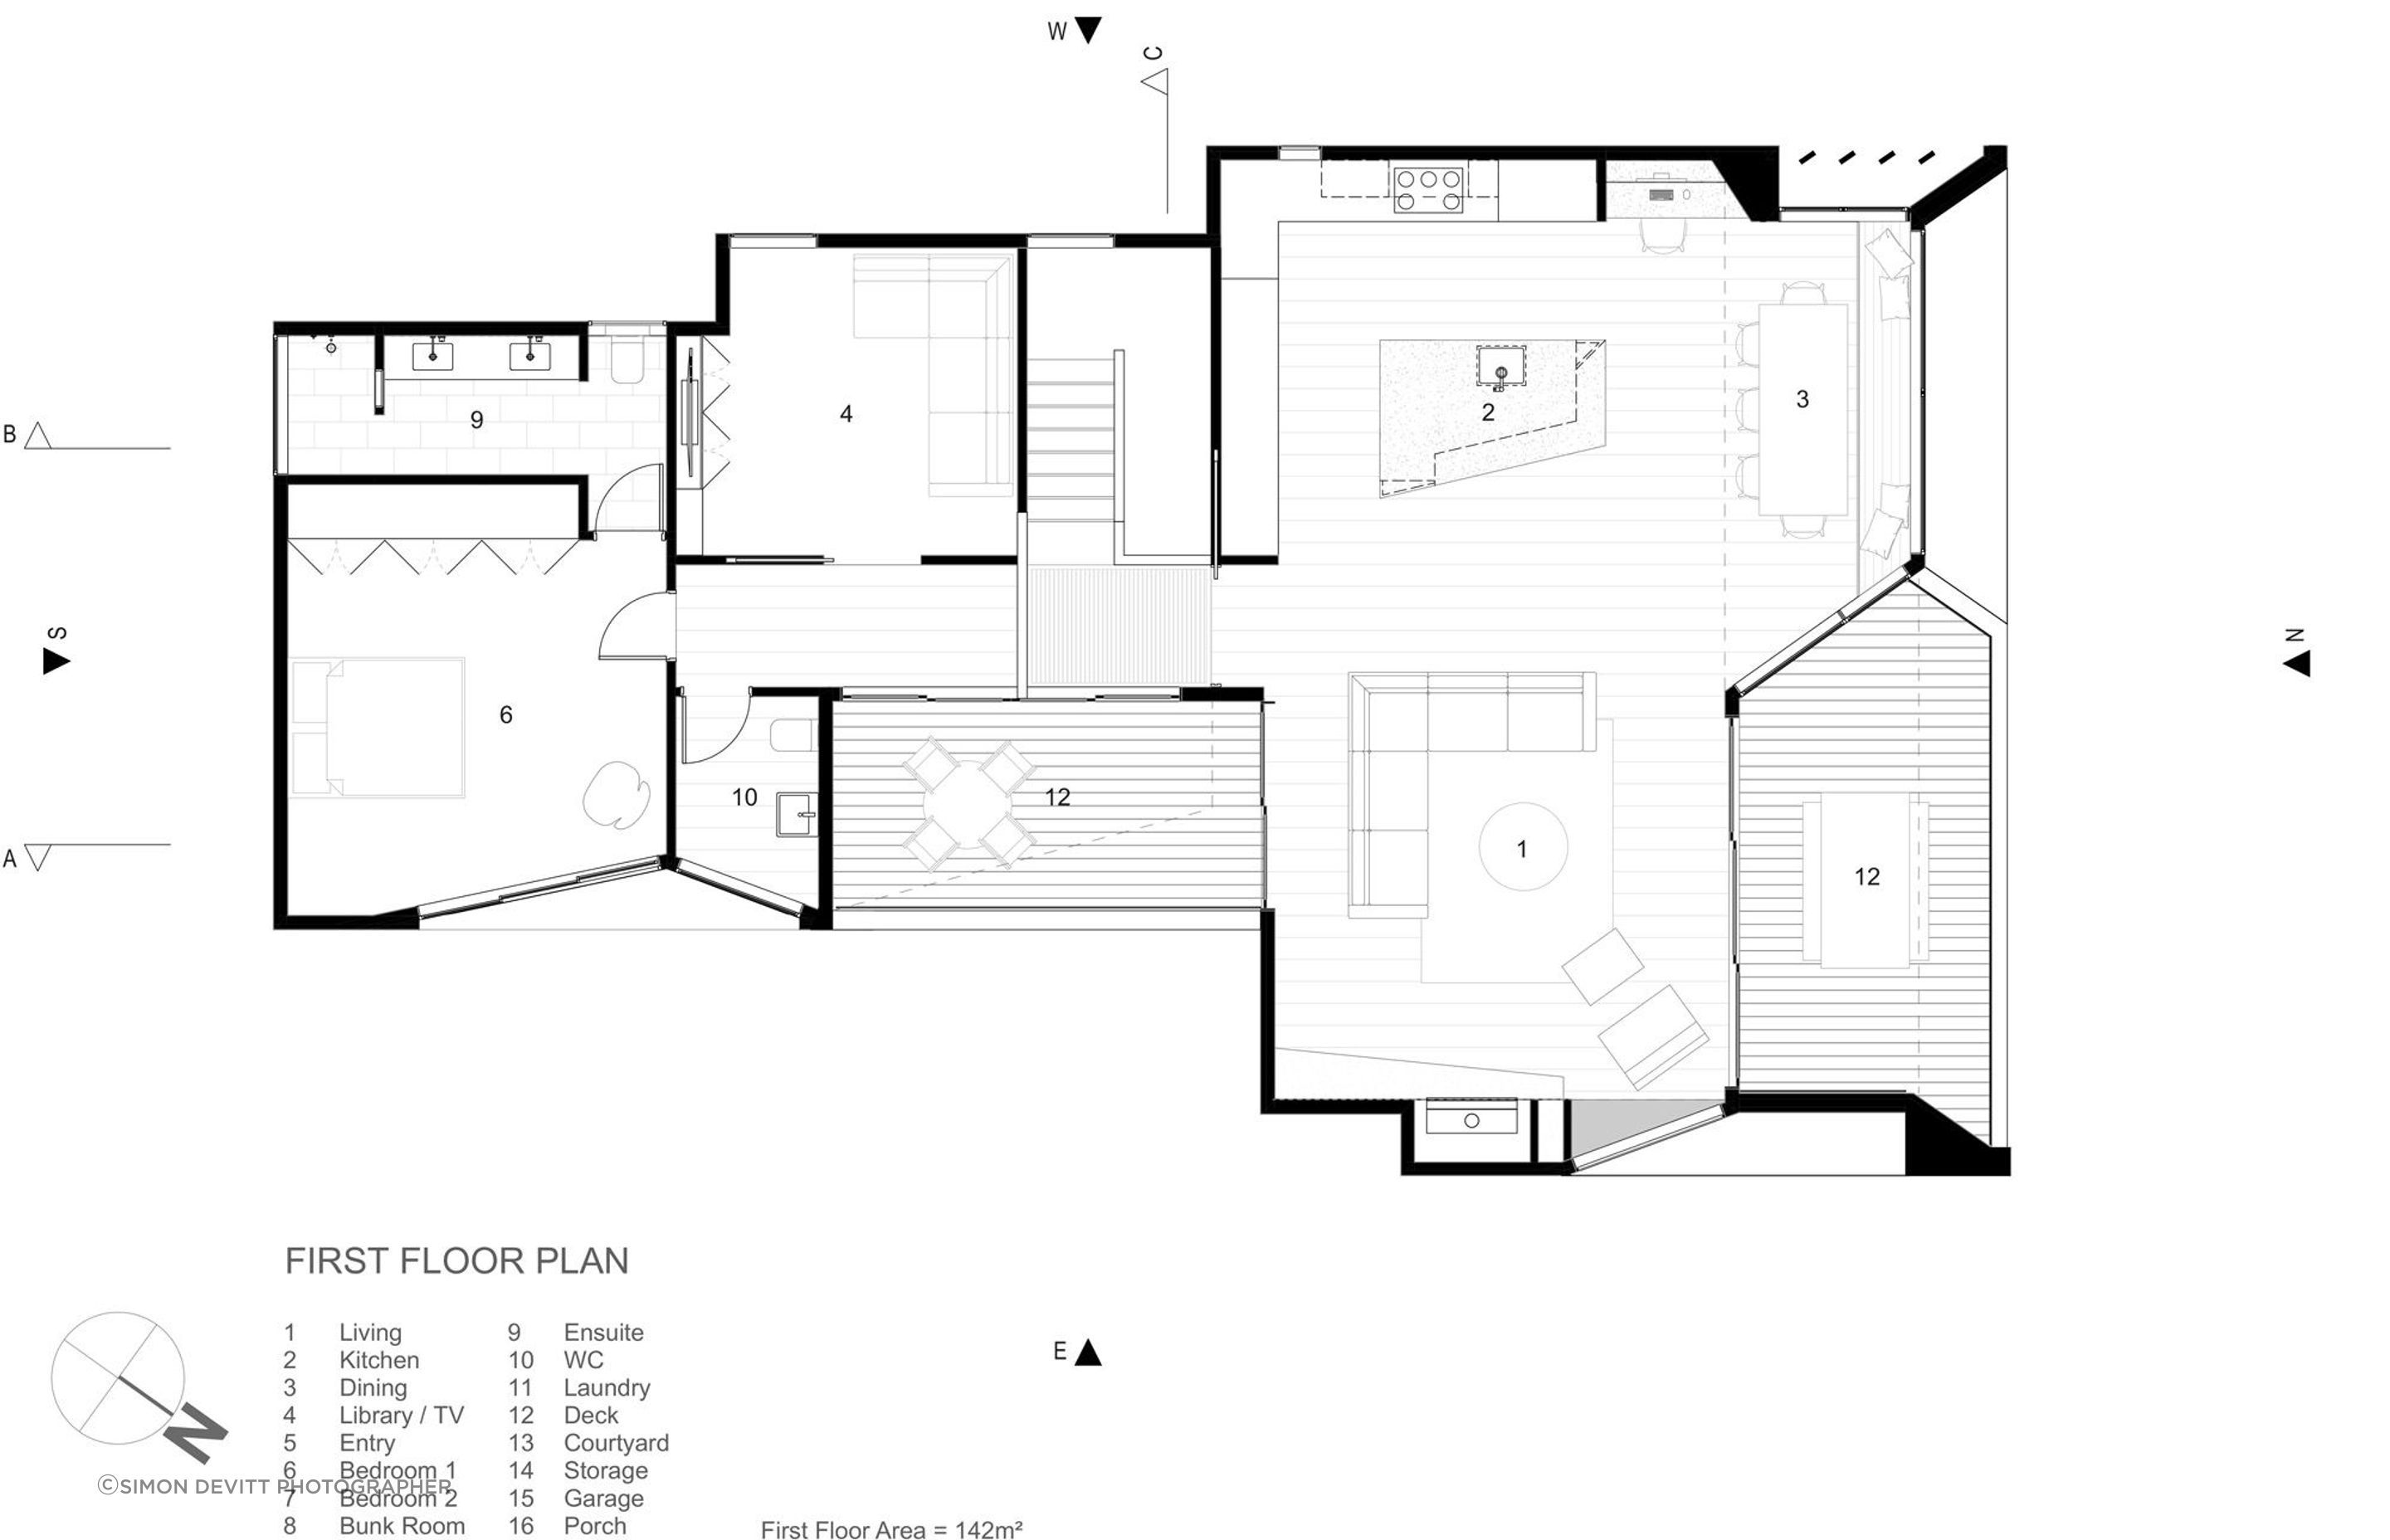 The first-floor plan by Julian Guthrie Architecture.